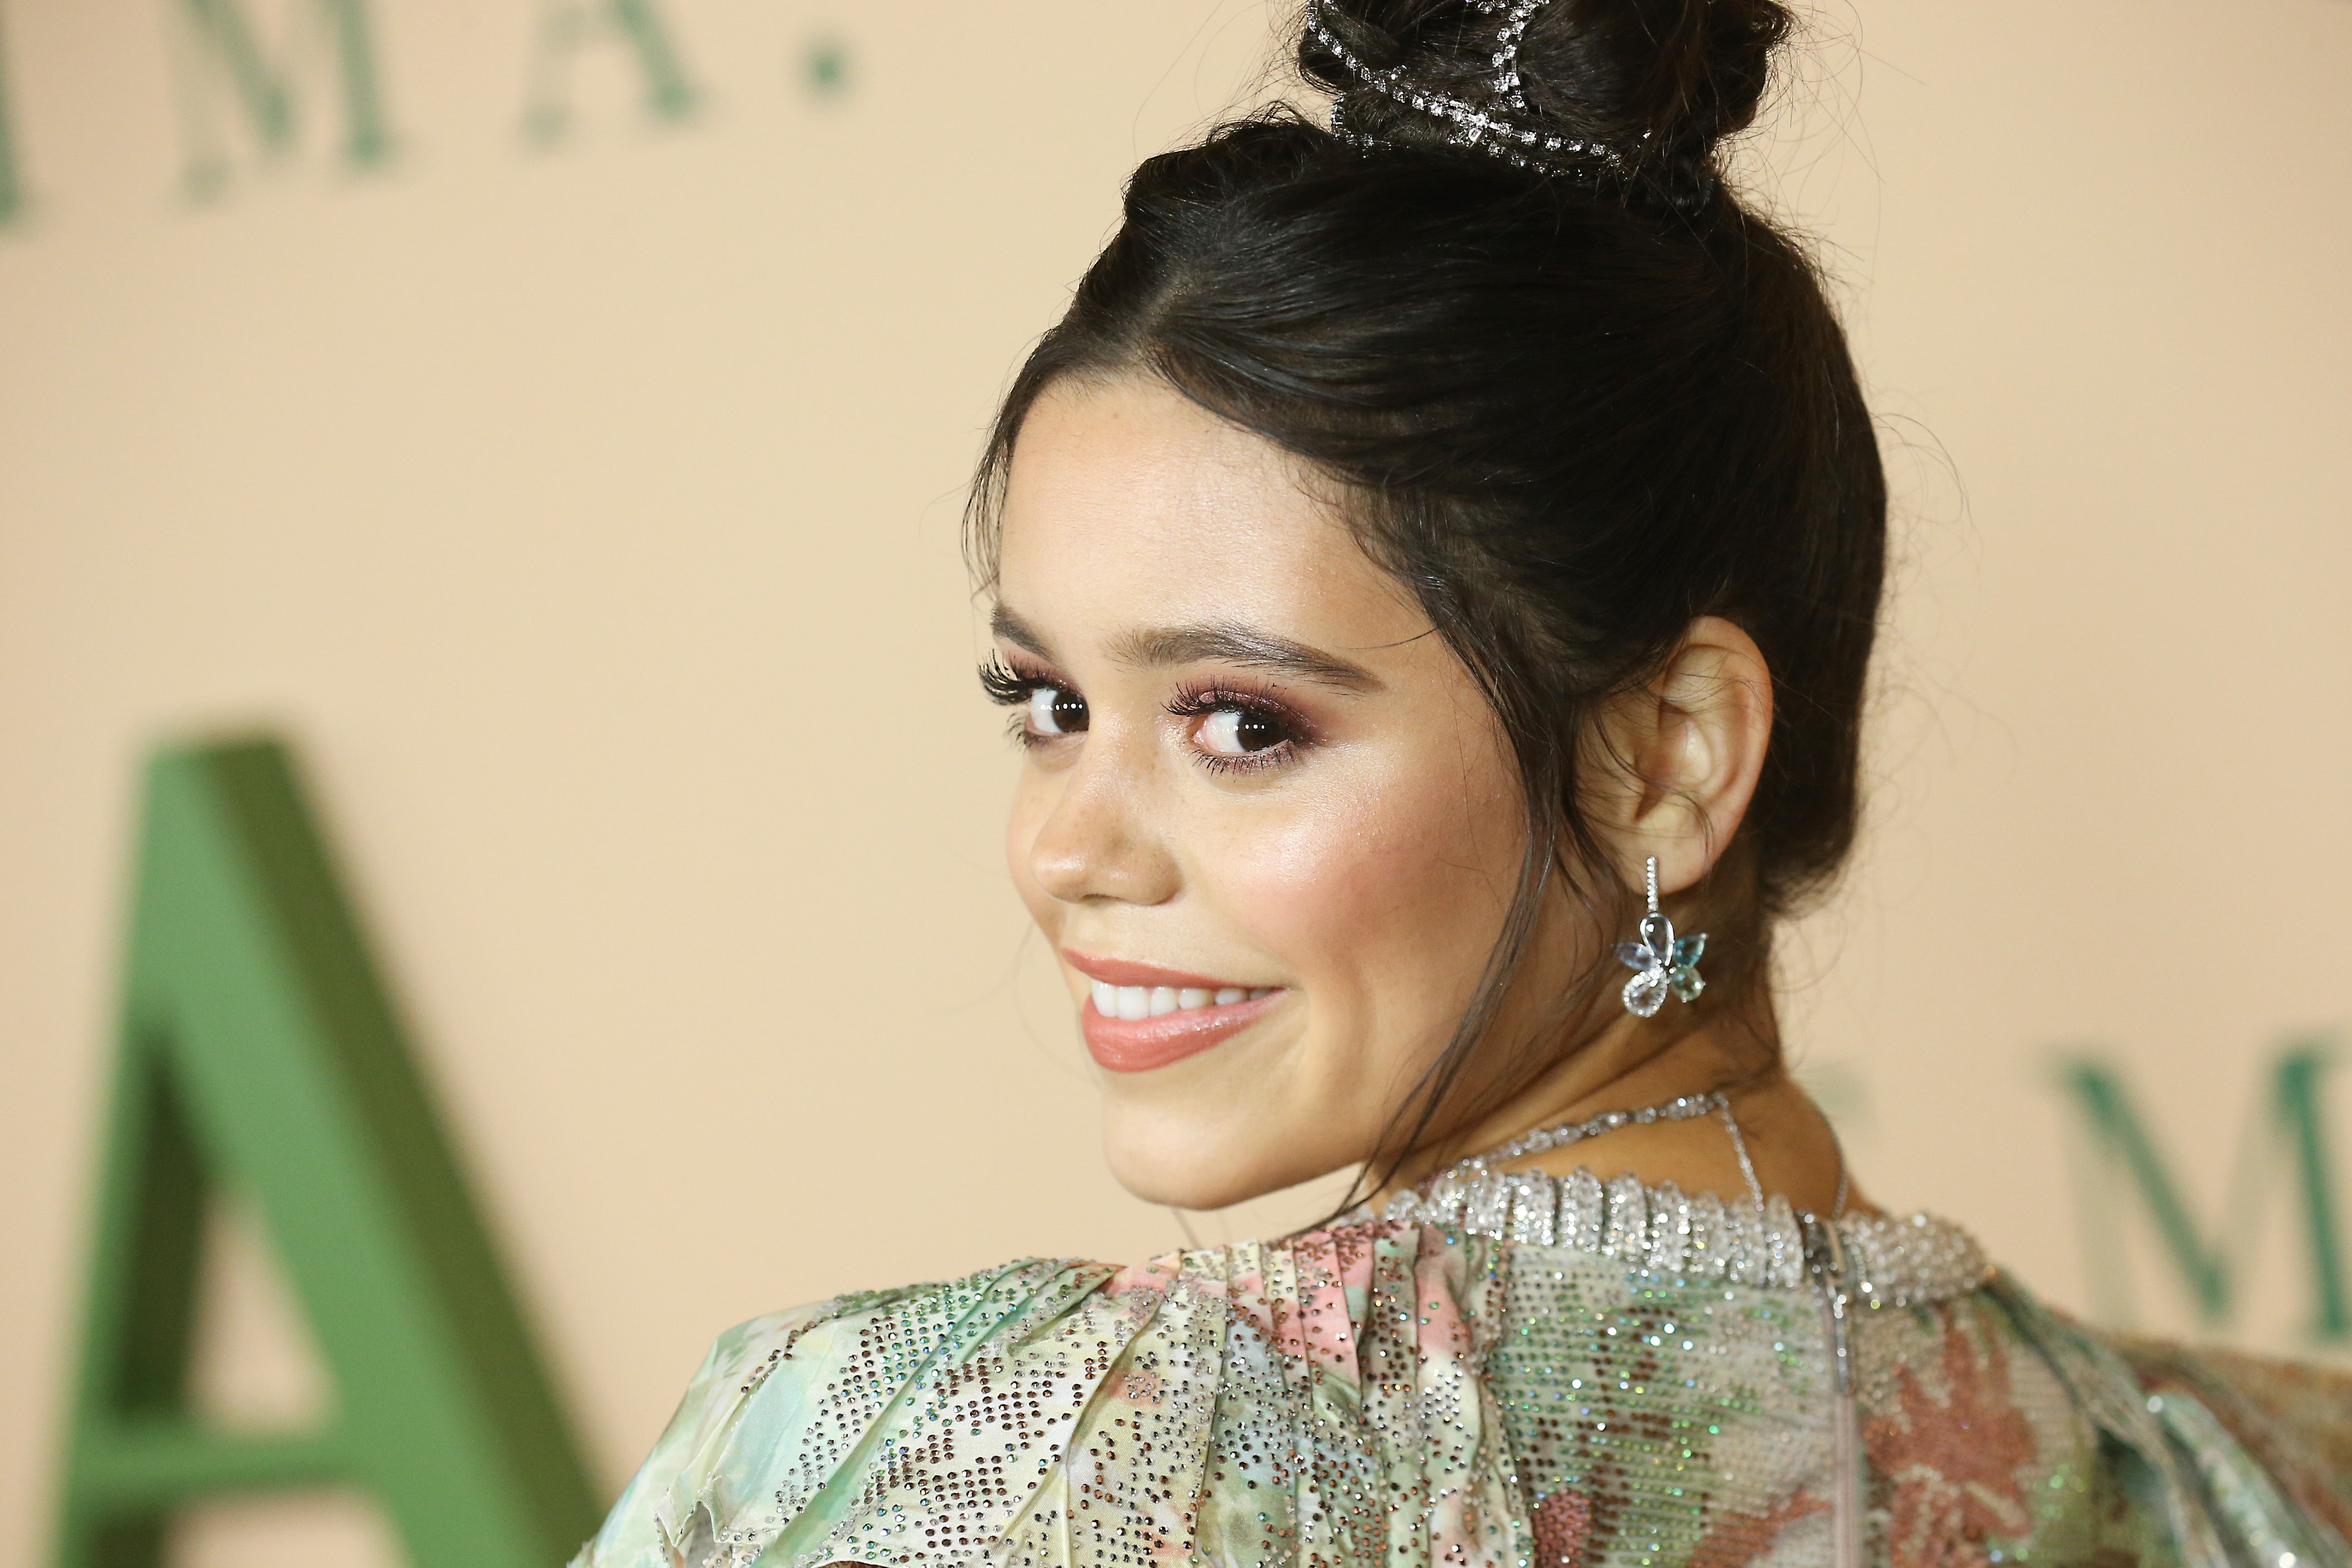 Jenna Ortega To Play Lead Wednesday Addams In Netflix's Live-Action Series  From Tim Burton – Deadline